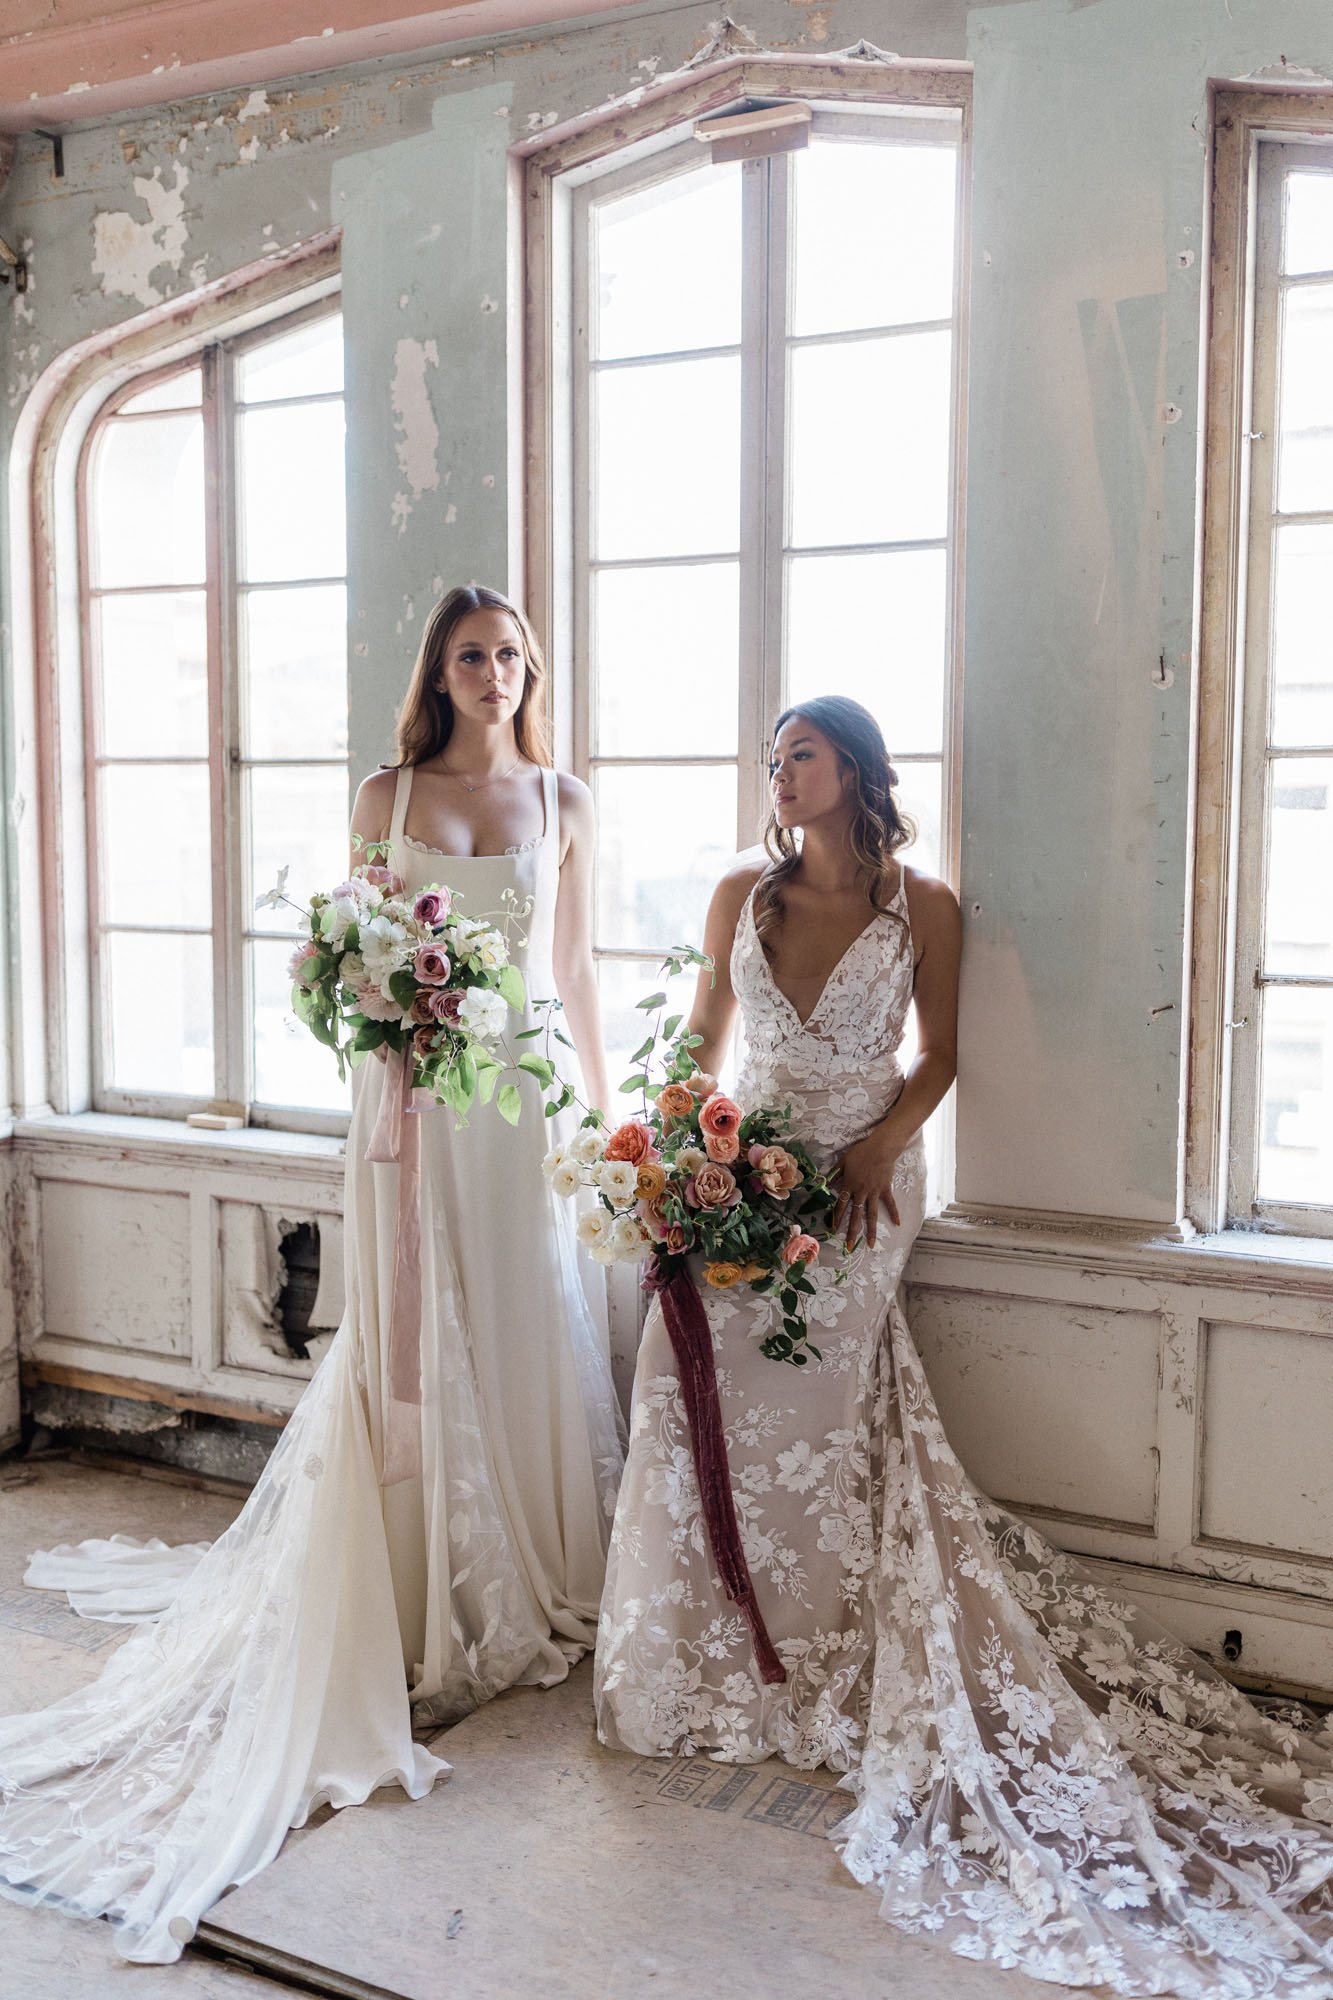  Two brides sitting in a window ledge of an old abandoned hotel in Oregon. One is wearing Alexandra Grecco Sienne wedding dress and the other is wearing Made With Love Elsie wedding dress. They are each holding large bridal bouquets with silk ribbons